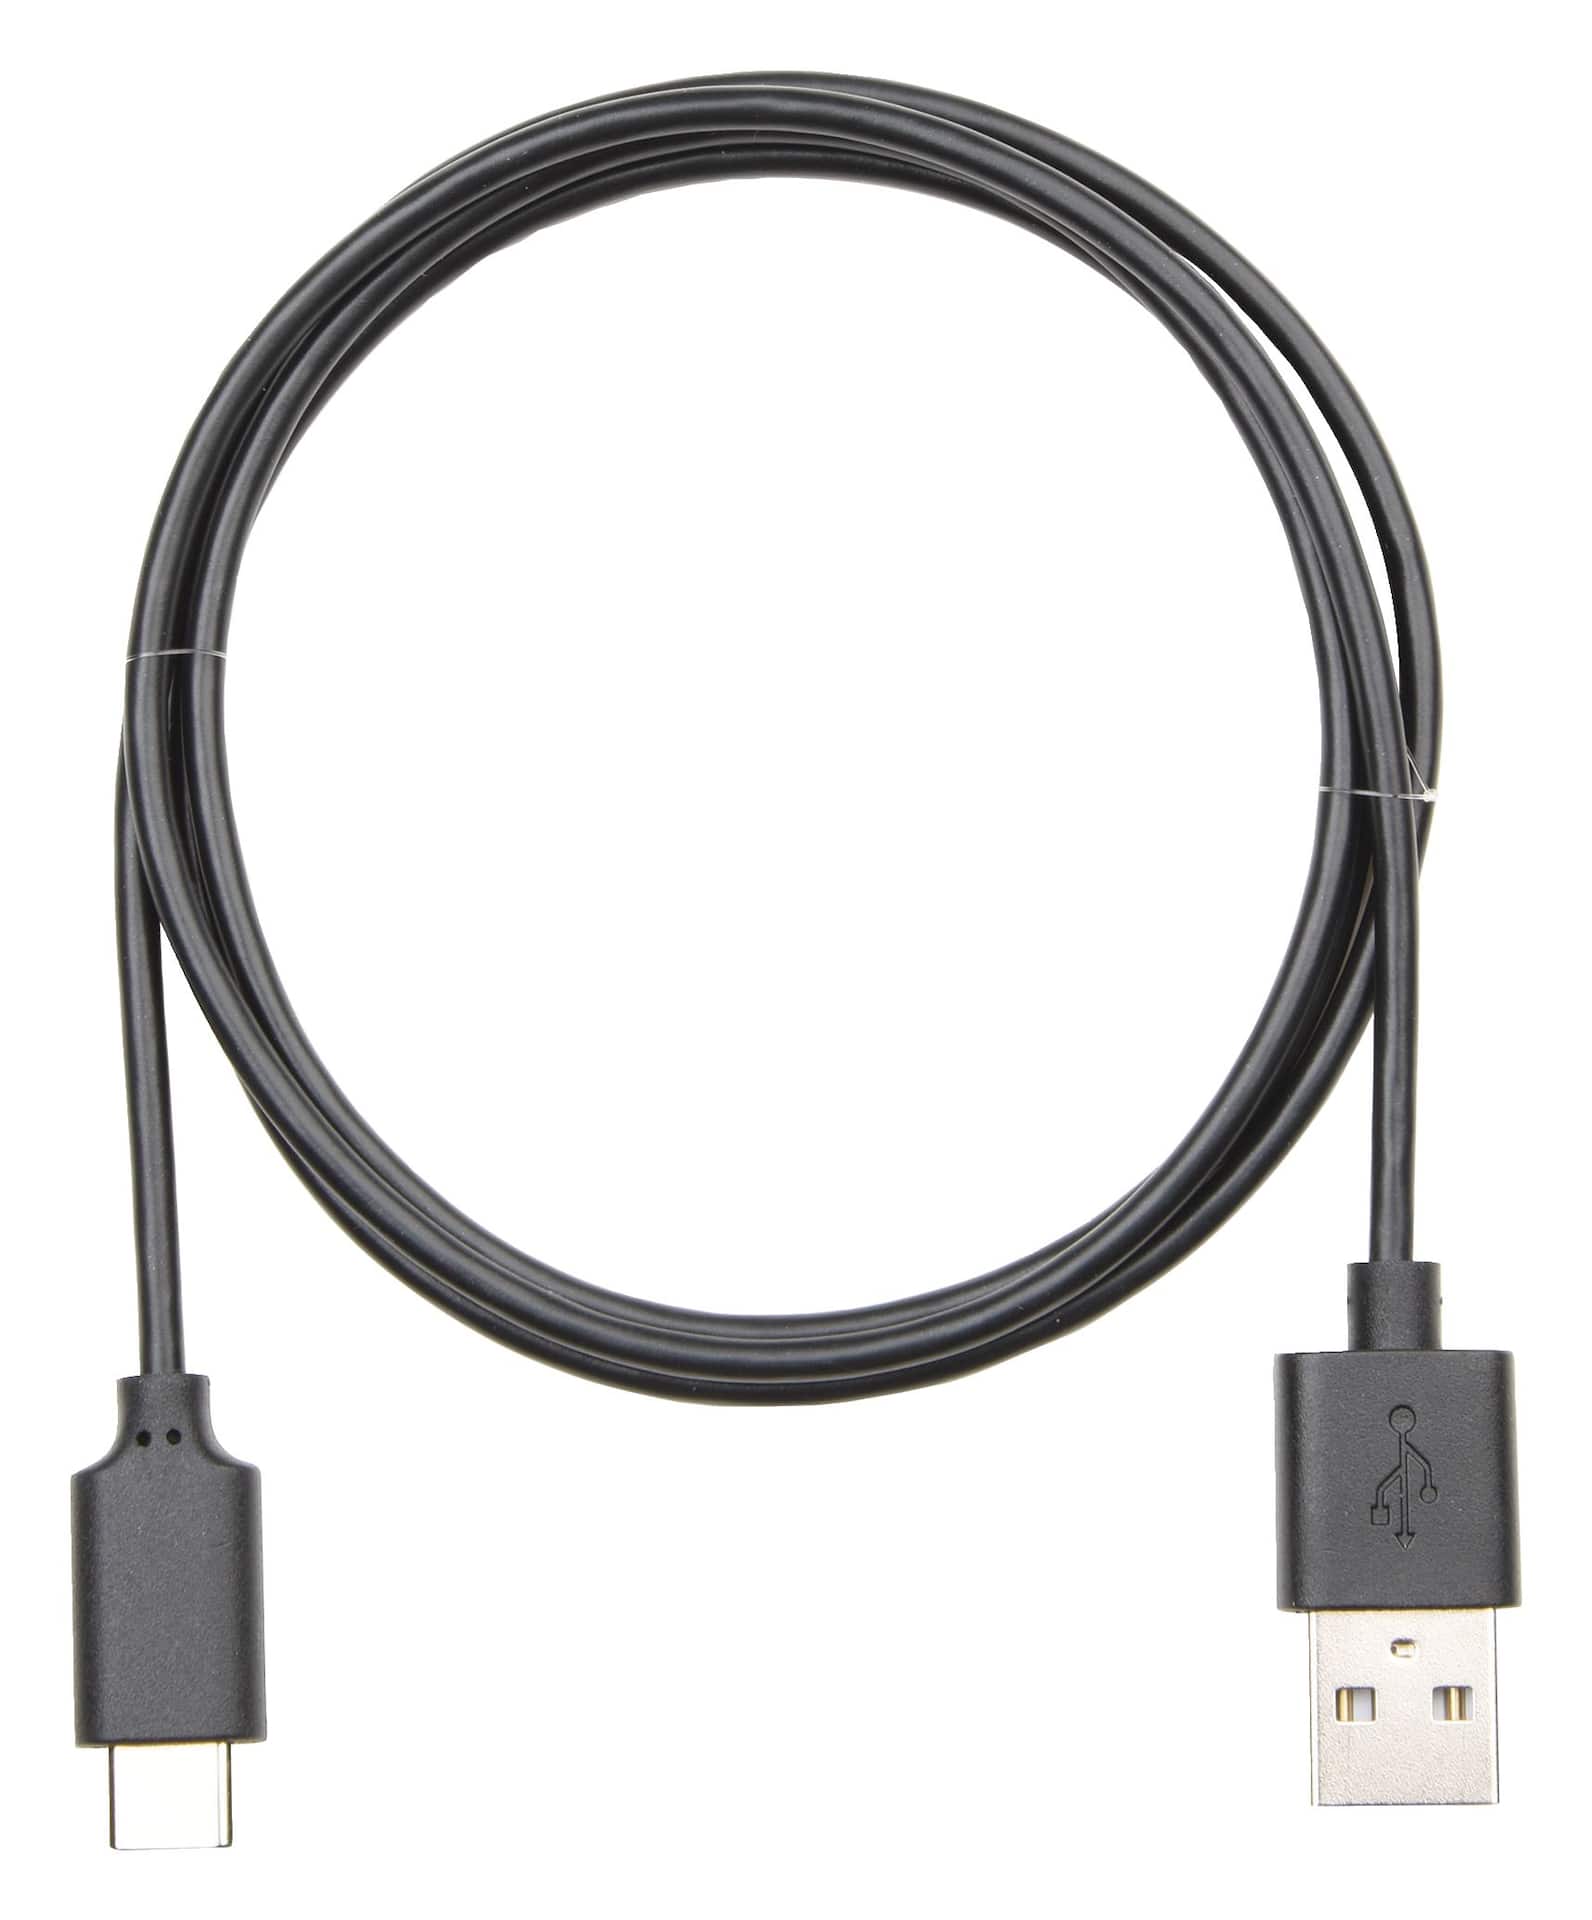 Jensen USB to USB-C Cable, 6-ft